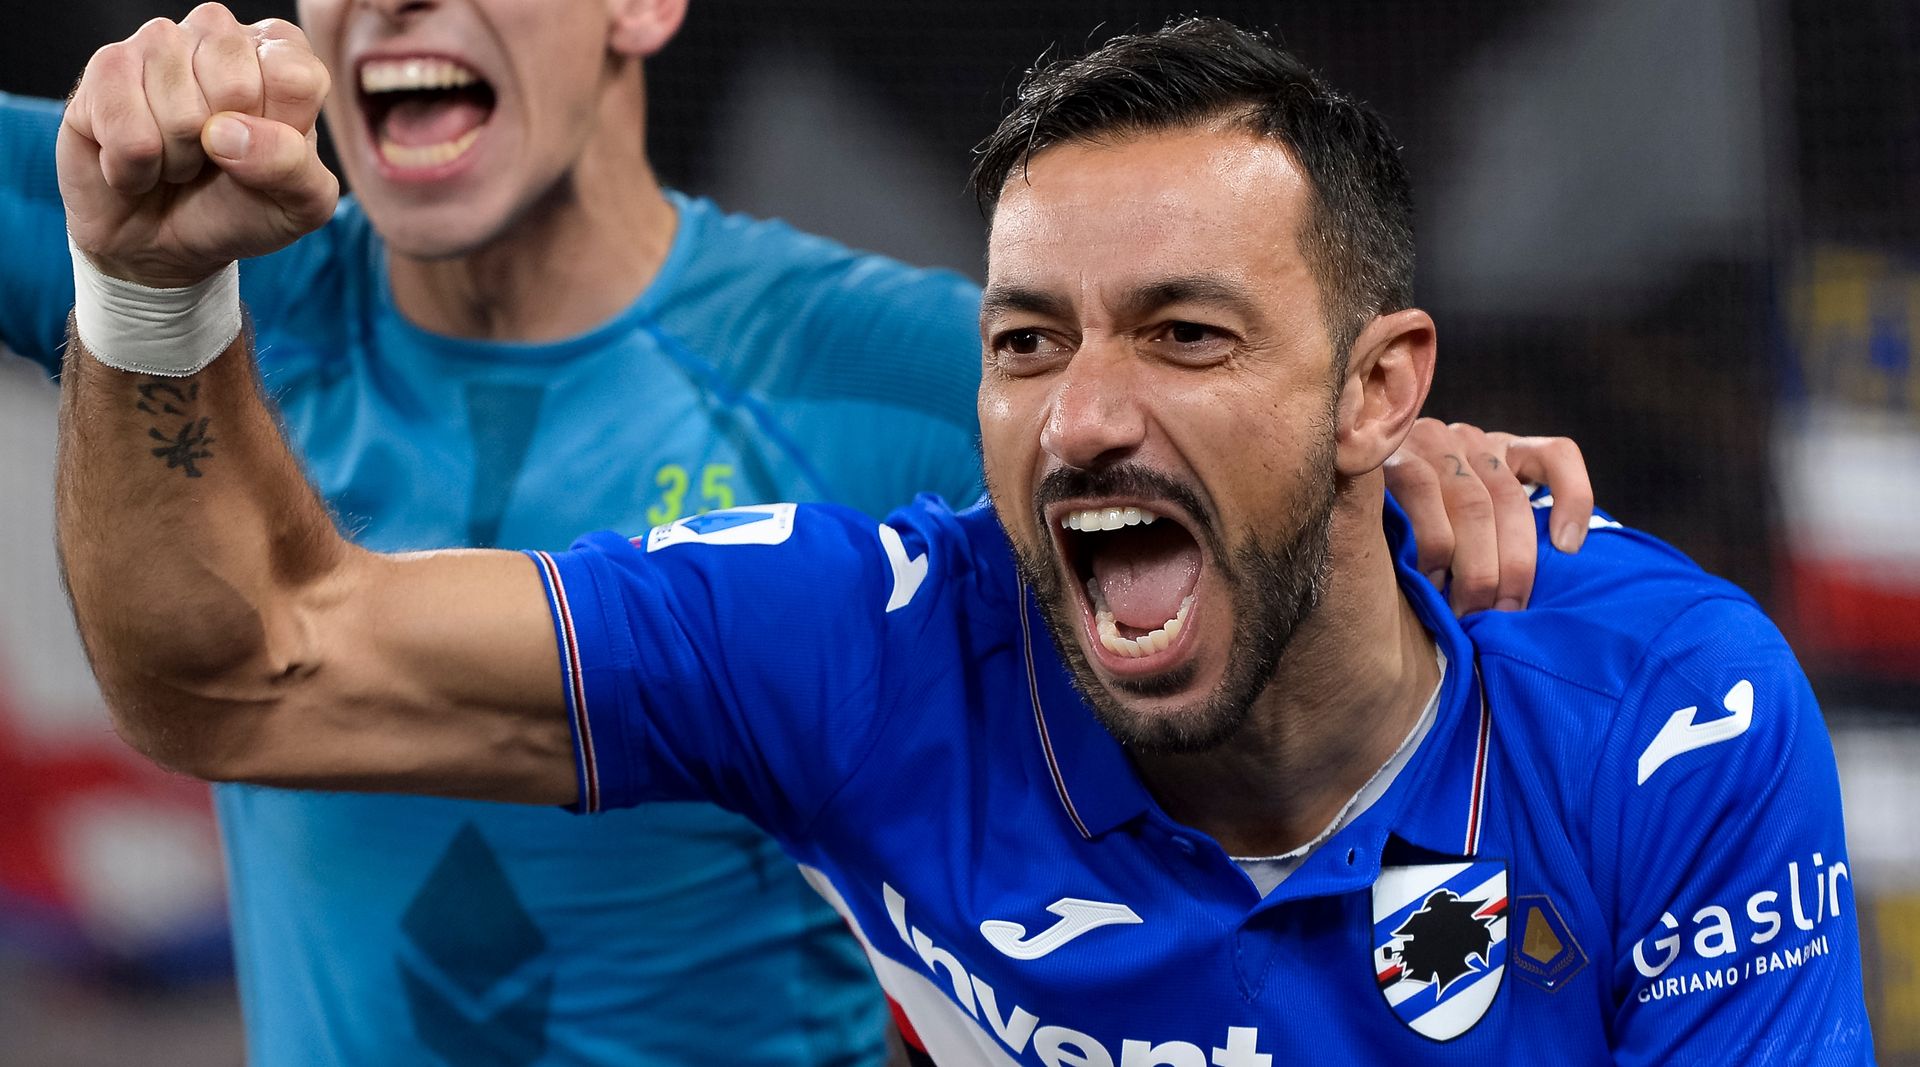 <p>                     A modern Italian cult hero, Fabio Quagliarella spent his entire career in his homeland – and he aged like the finest of wines, scooping the 2018/19 <em>Capocannoniere</em> award as Serie A top scorer aged 36.                   </p>                                      <p>                     Equally impressive was that he did it while playing for mid-table Sampdoria – where he emulated the great Gabriel Batistuta by finding the net in 11 straight Serie A games between October 2018 and January 2019.                   </p>